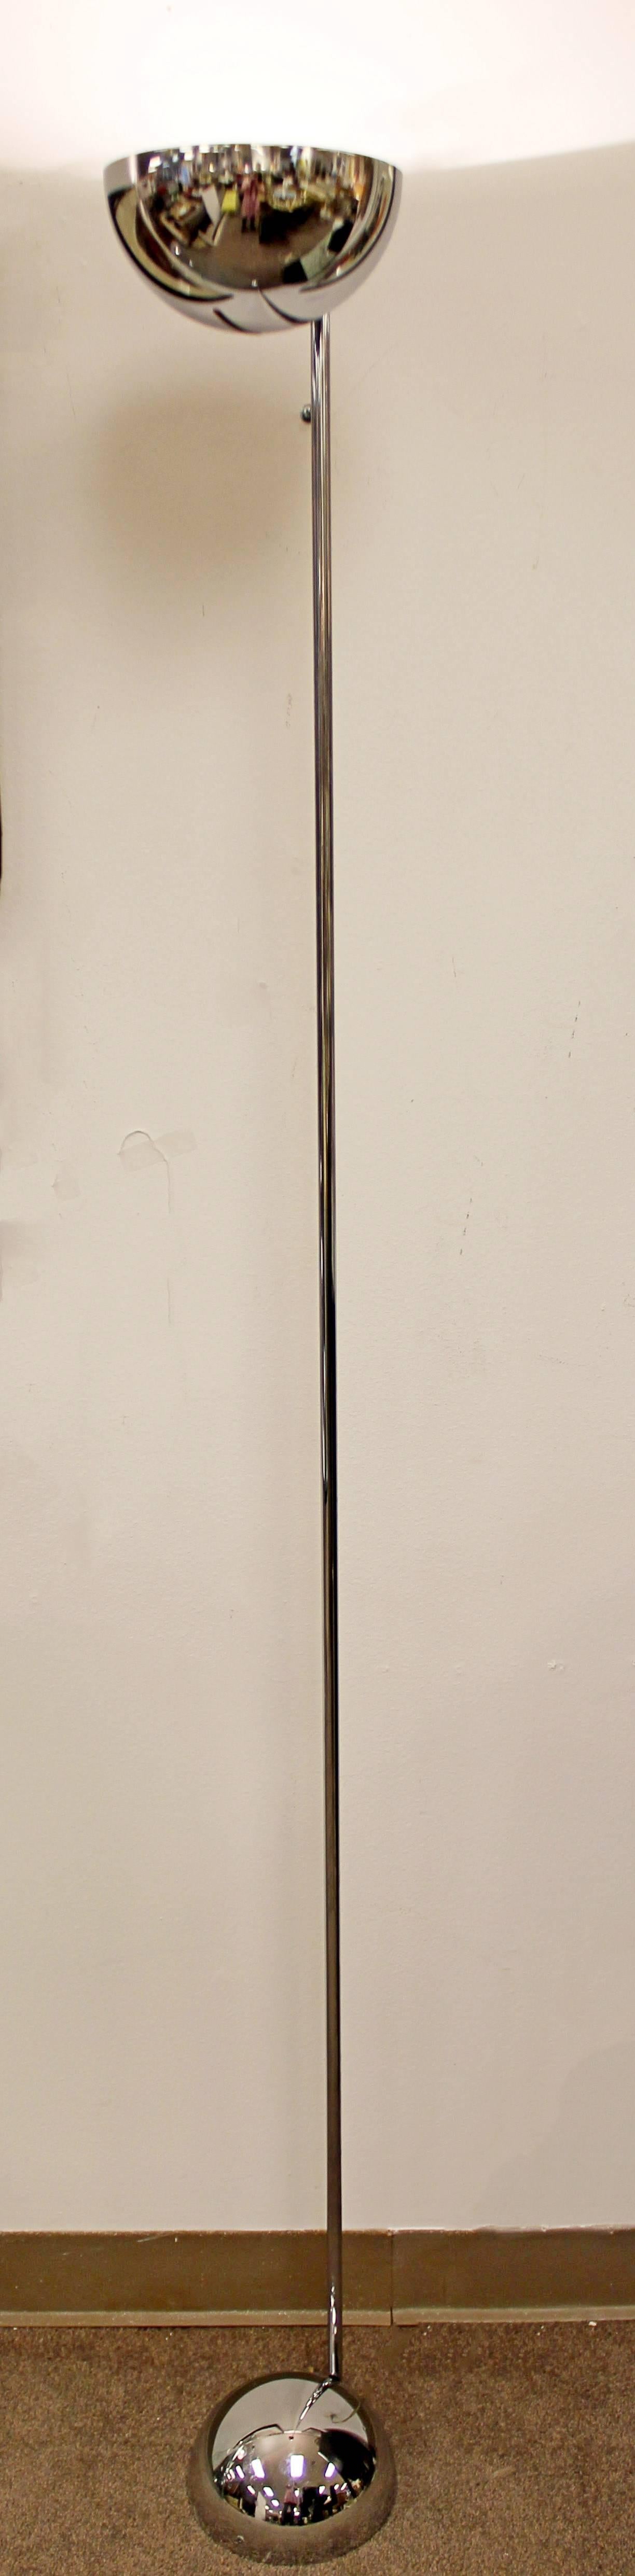 For your consideration is a pair of chrome, torchiere floor lamps, by Robert Sonneman. In excellent condition. The dimensions are 7